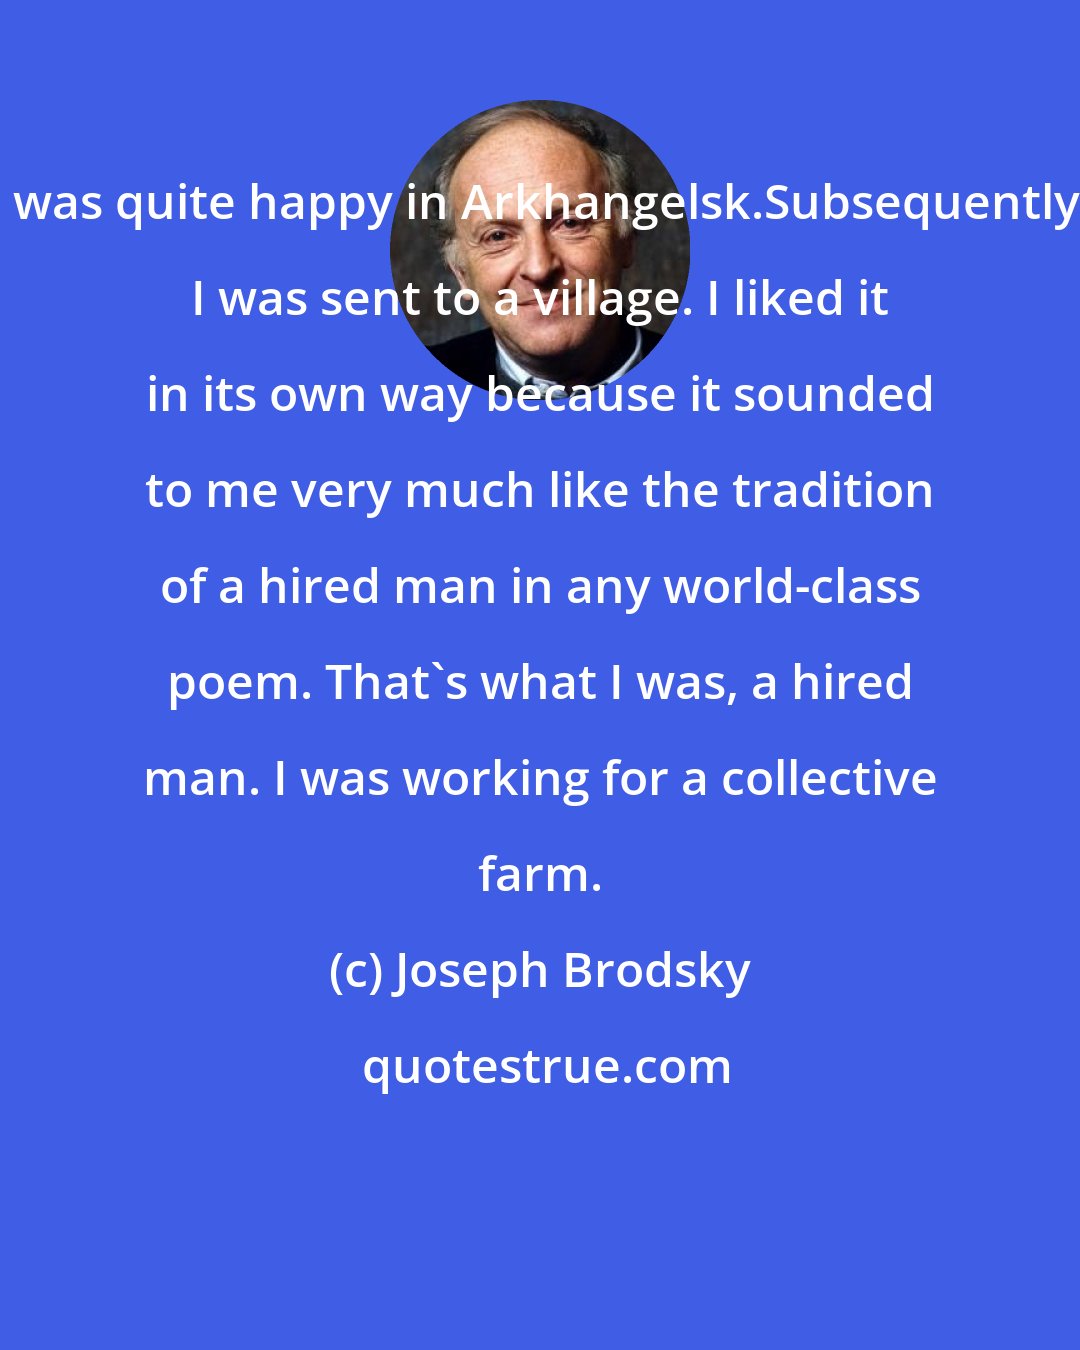 Joseph Brodsky: I was quite happy in Arkhangelsk.Subsequently, I was sent to a village. I liked it in its own way because it sounded to me very much like the tradition of a hired man in any world-class poem. That's what I was, a hired man. I was working for a collective farm.